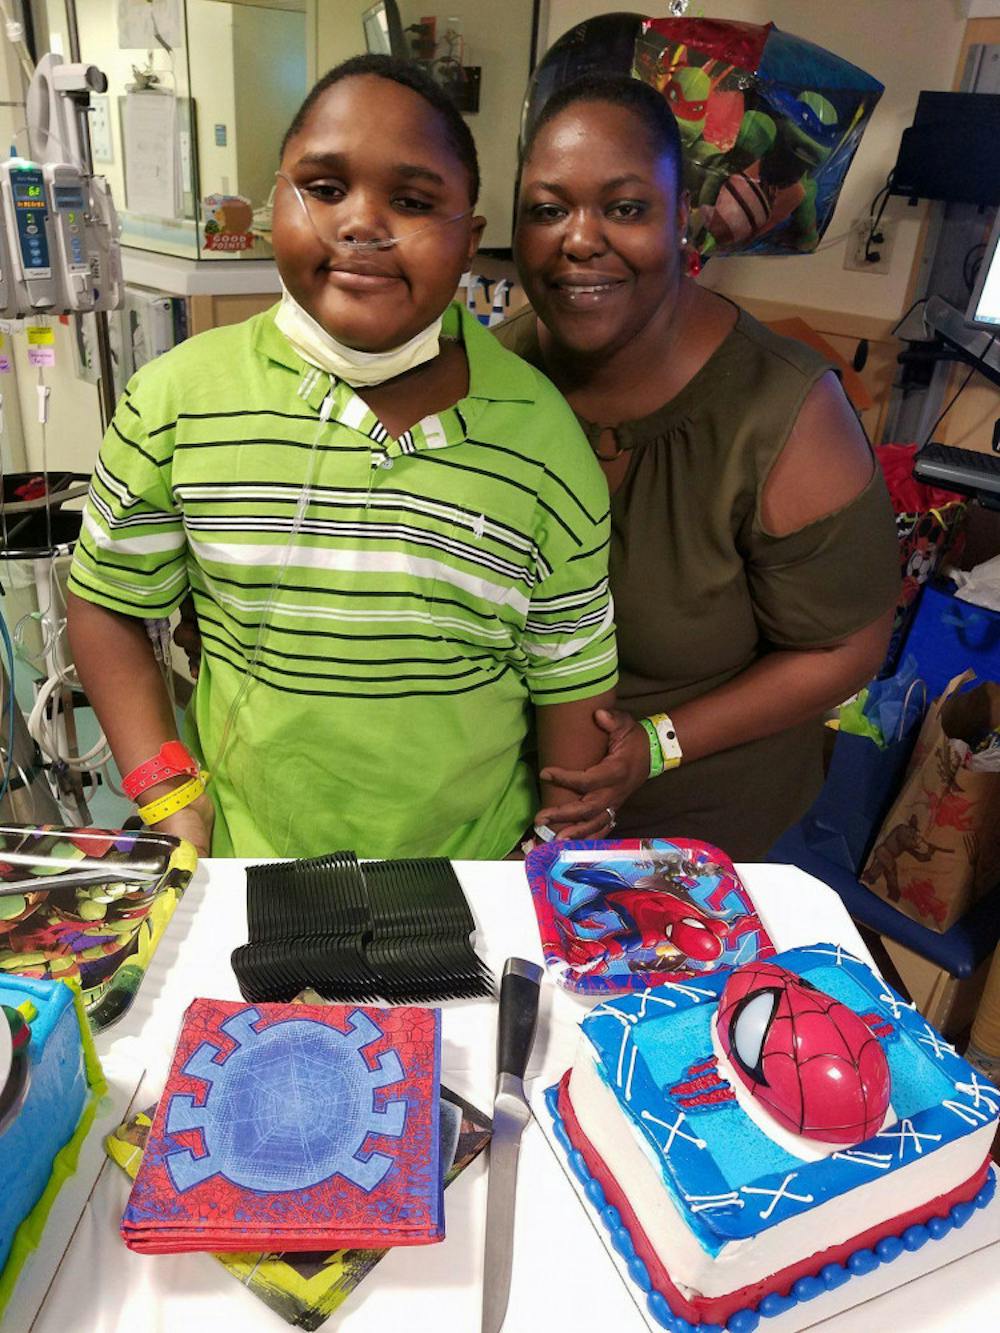 <p dir="ltr"><span>Lowell Thomas and his mother, Malika, celebrate Lowell’s 11th birthday Oct. 30 in the Congenital Heart Center at UF Health Shands Hospital. Lowell, a native of St. Croix, U.S. Virgin Islands, was diagnosed with a fatal heart condition in August while he and Mallika were on vacation in Jacksonville.</span></p><p><span> </span></p>